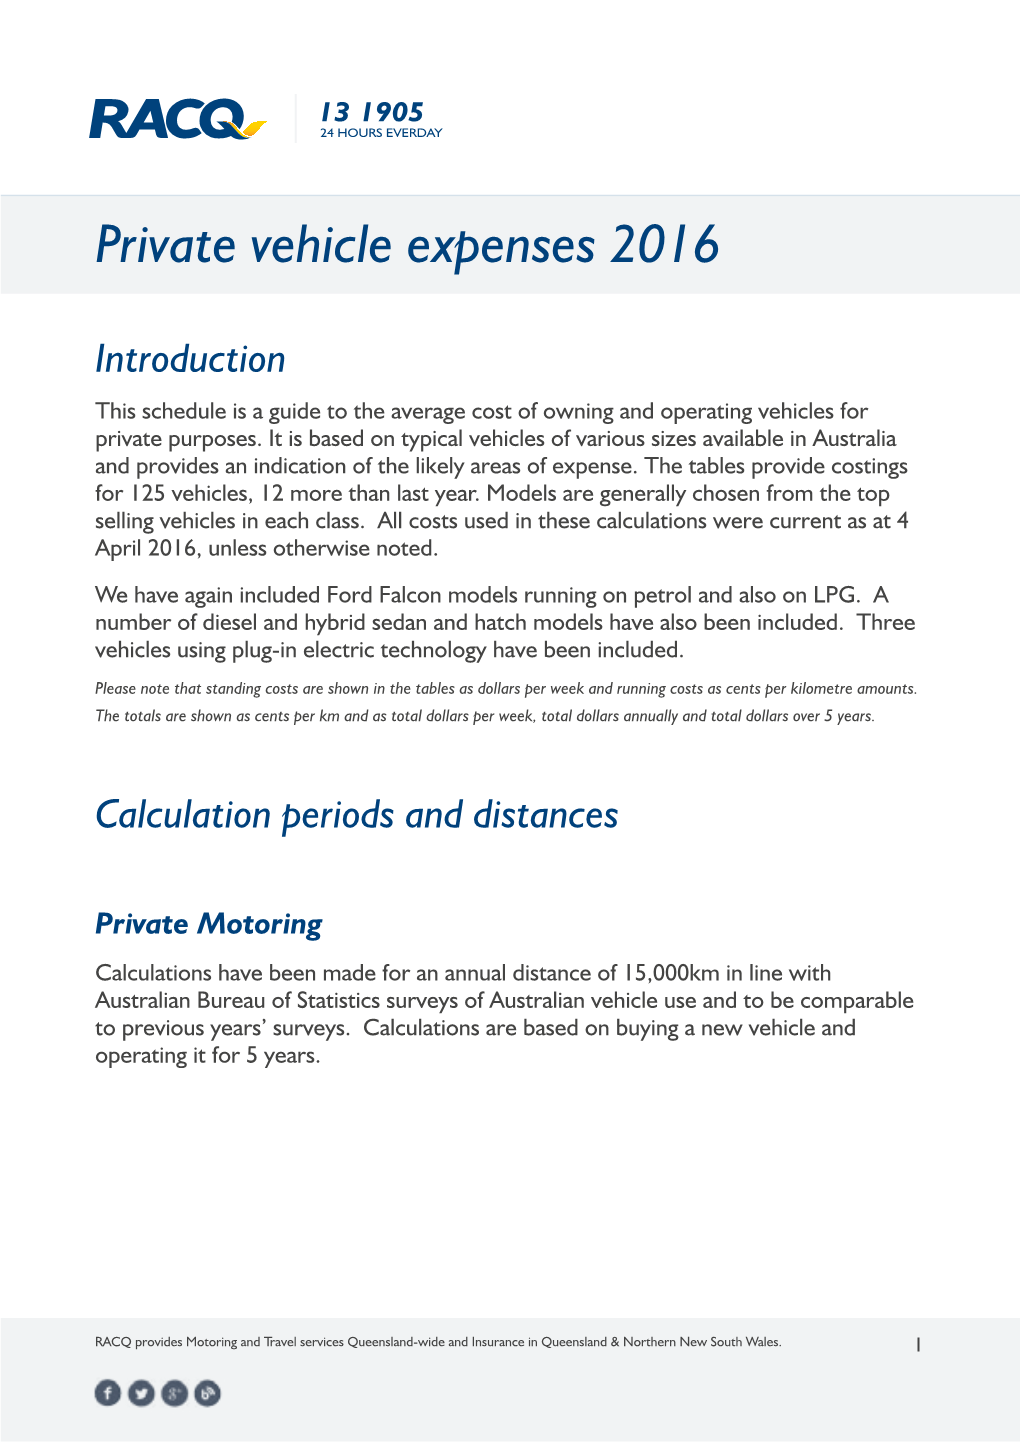 Private Vehicle Expenses 2016